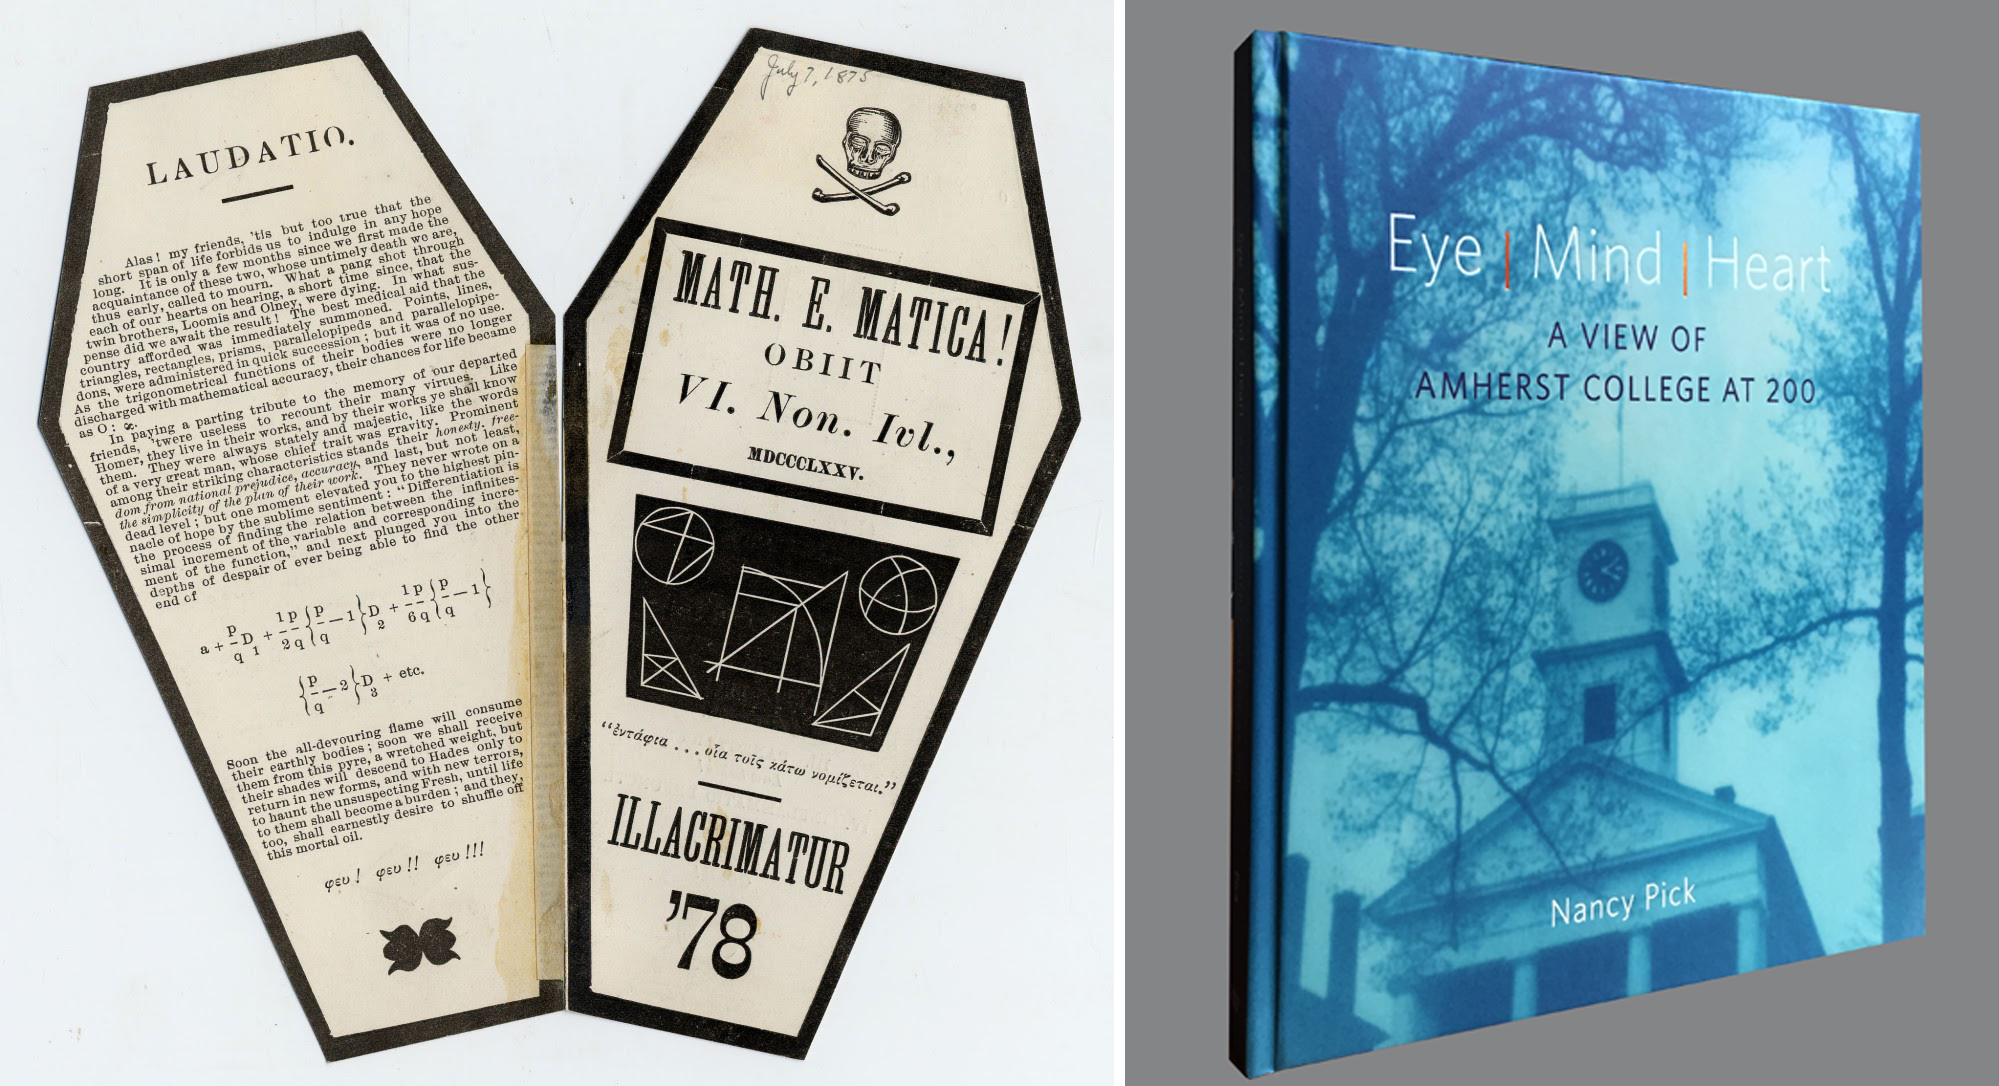 Photo of the cover of "Eye Mind Heart" and an archival image of a 19th century mock funeral program